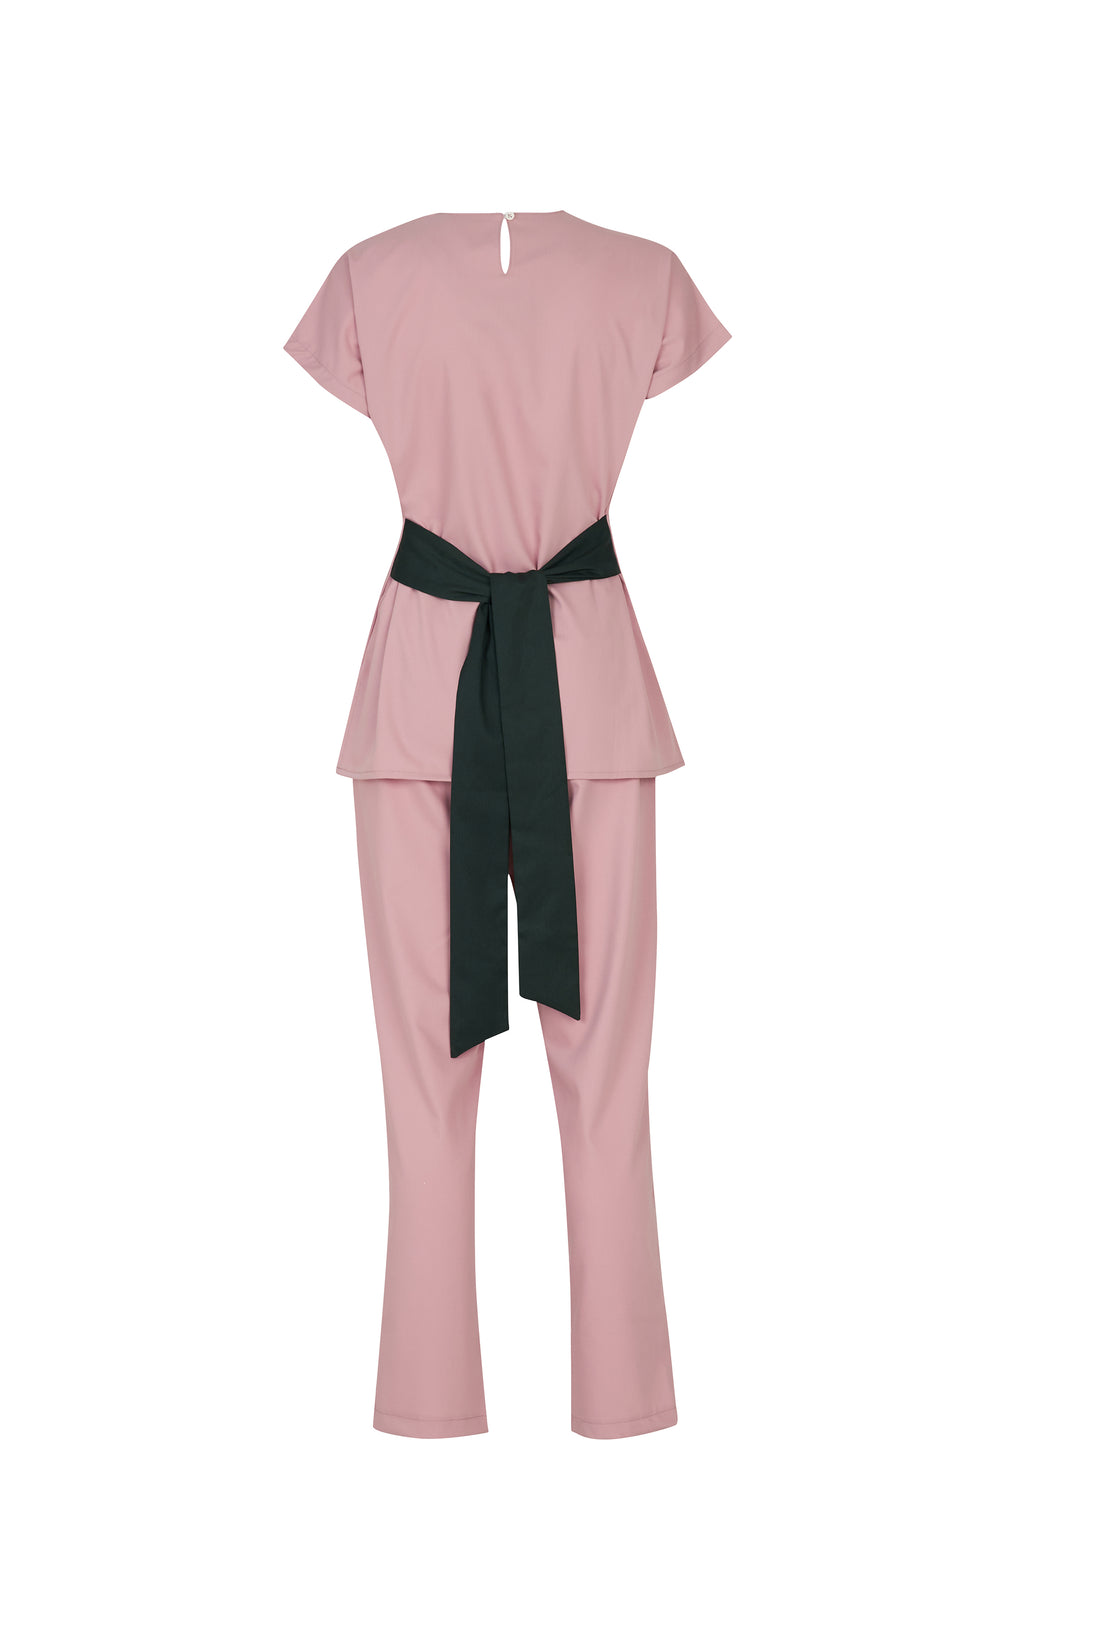 Beliz Spa Therapist and Attendant Receptionist Uniform in Dusty Rose with Contrasting Sash